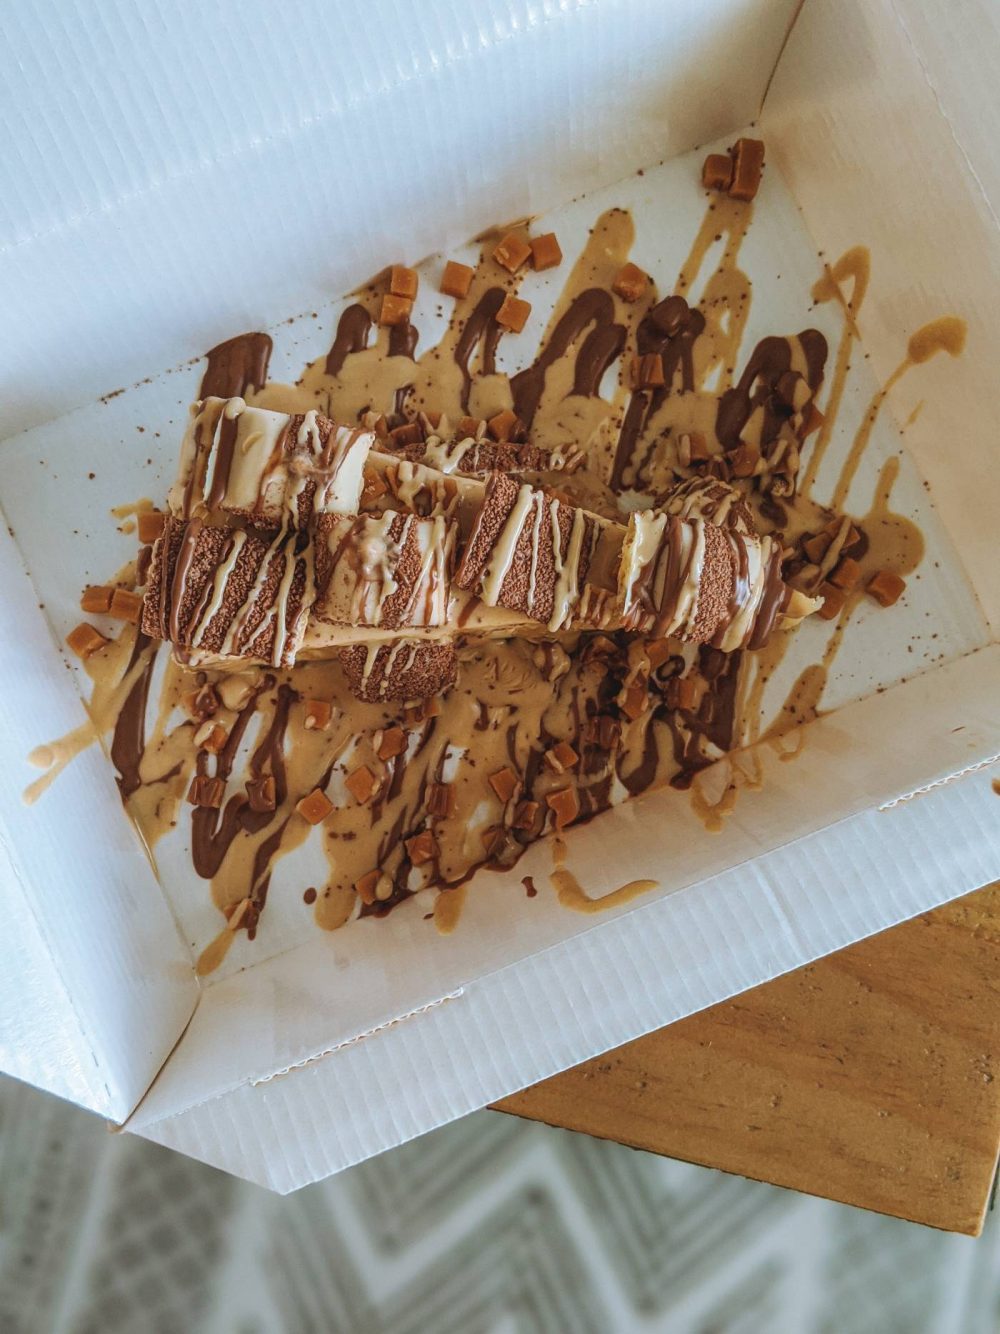 Kinder Bueno Waffle from Treat Street MK1 - Eat Out to Help out in Milton Keynes.